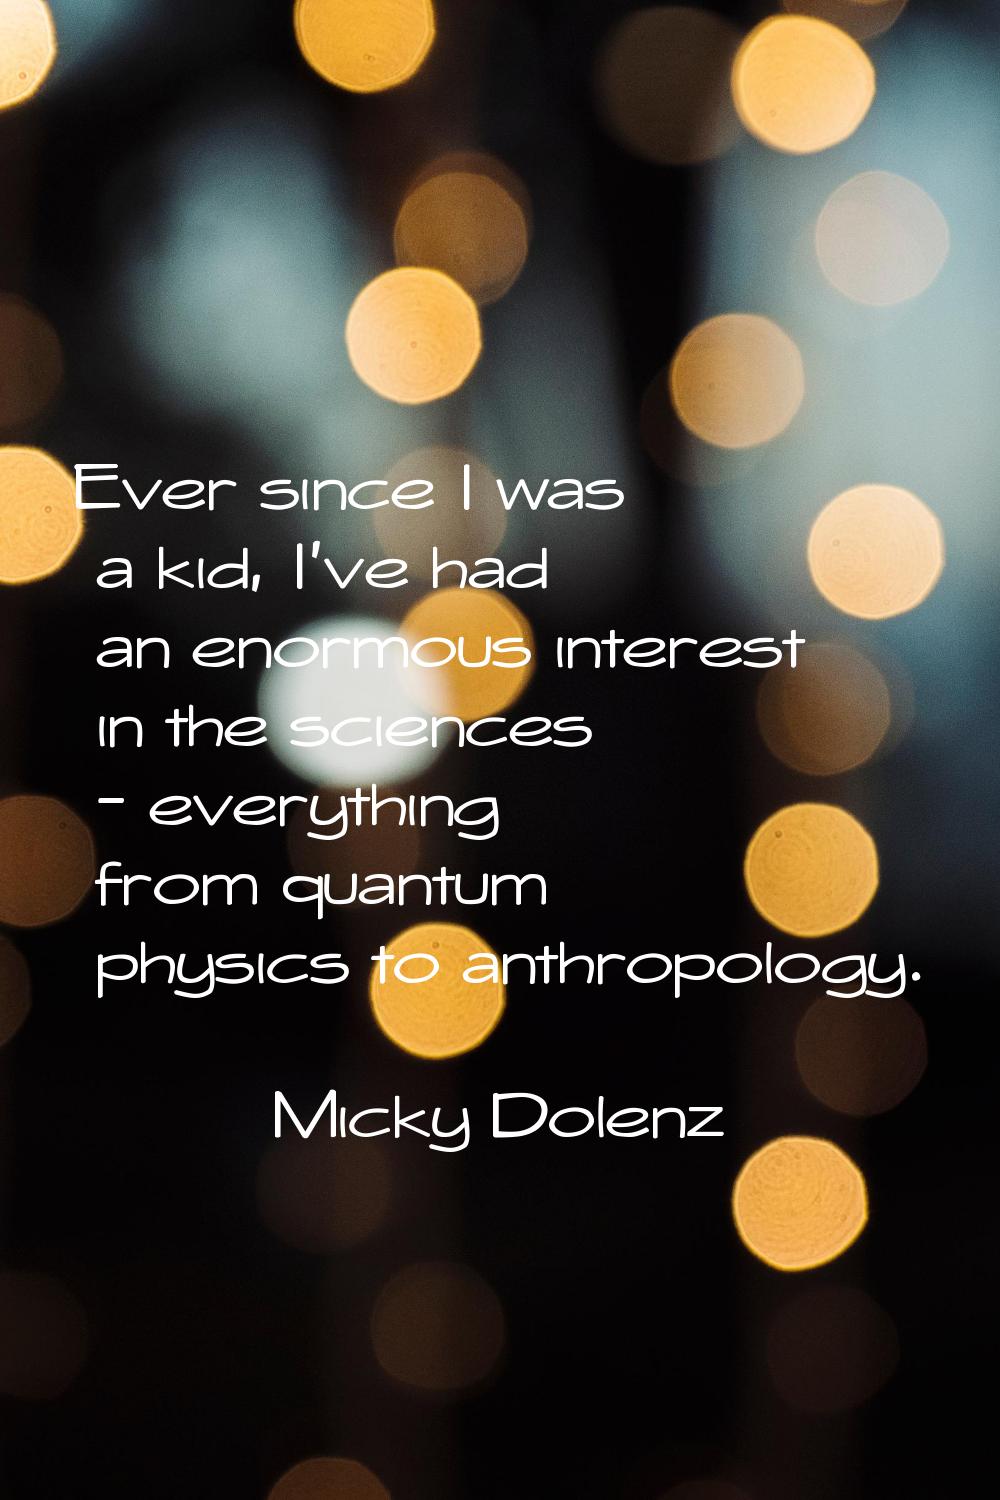 Ever since I was a kid, I've had an enormous interest in the sciences - everything from quantum phy